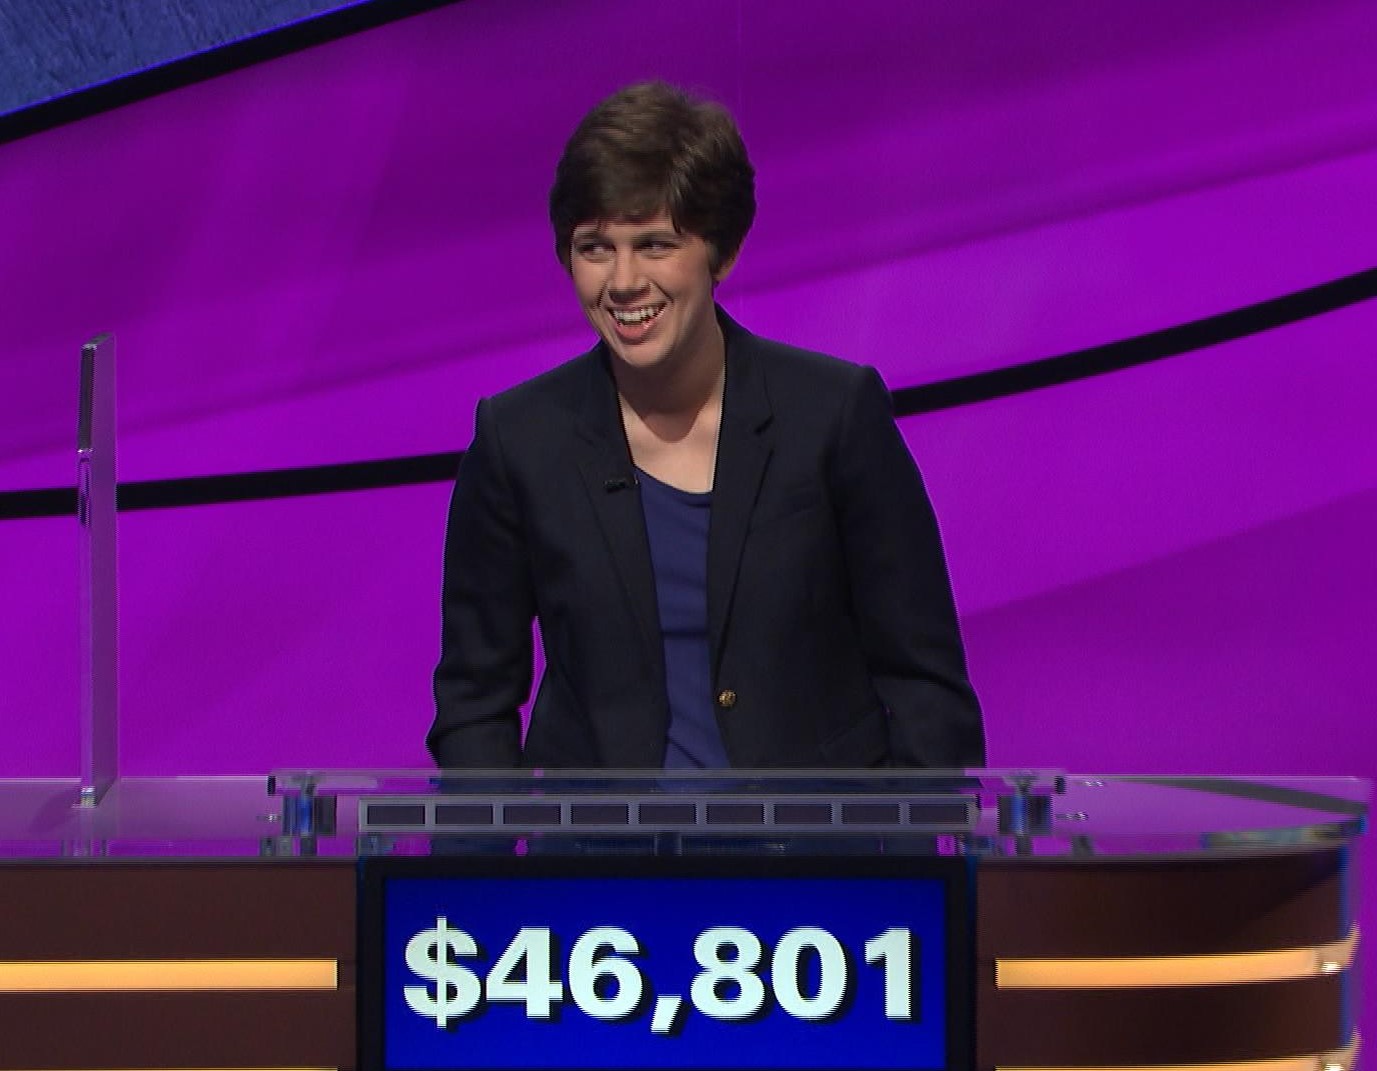 A Jeopardy! Champ Falls: How This Librarian Beat a Professional Gambler at His Own Game